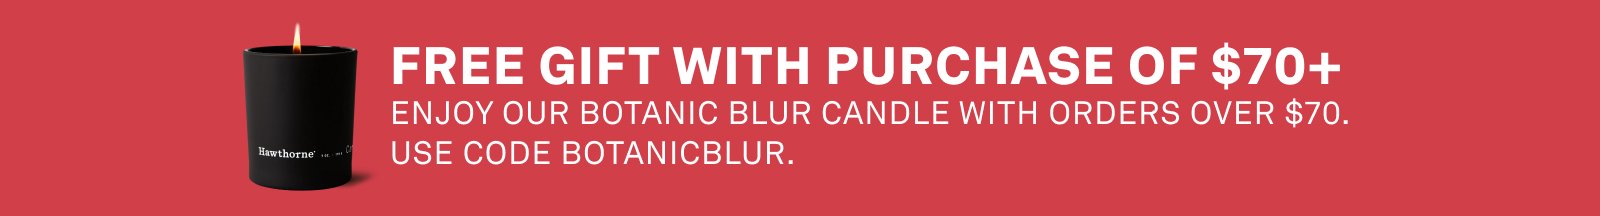 Free Botanic Blur Candle with orders over \\$170